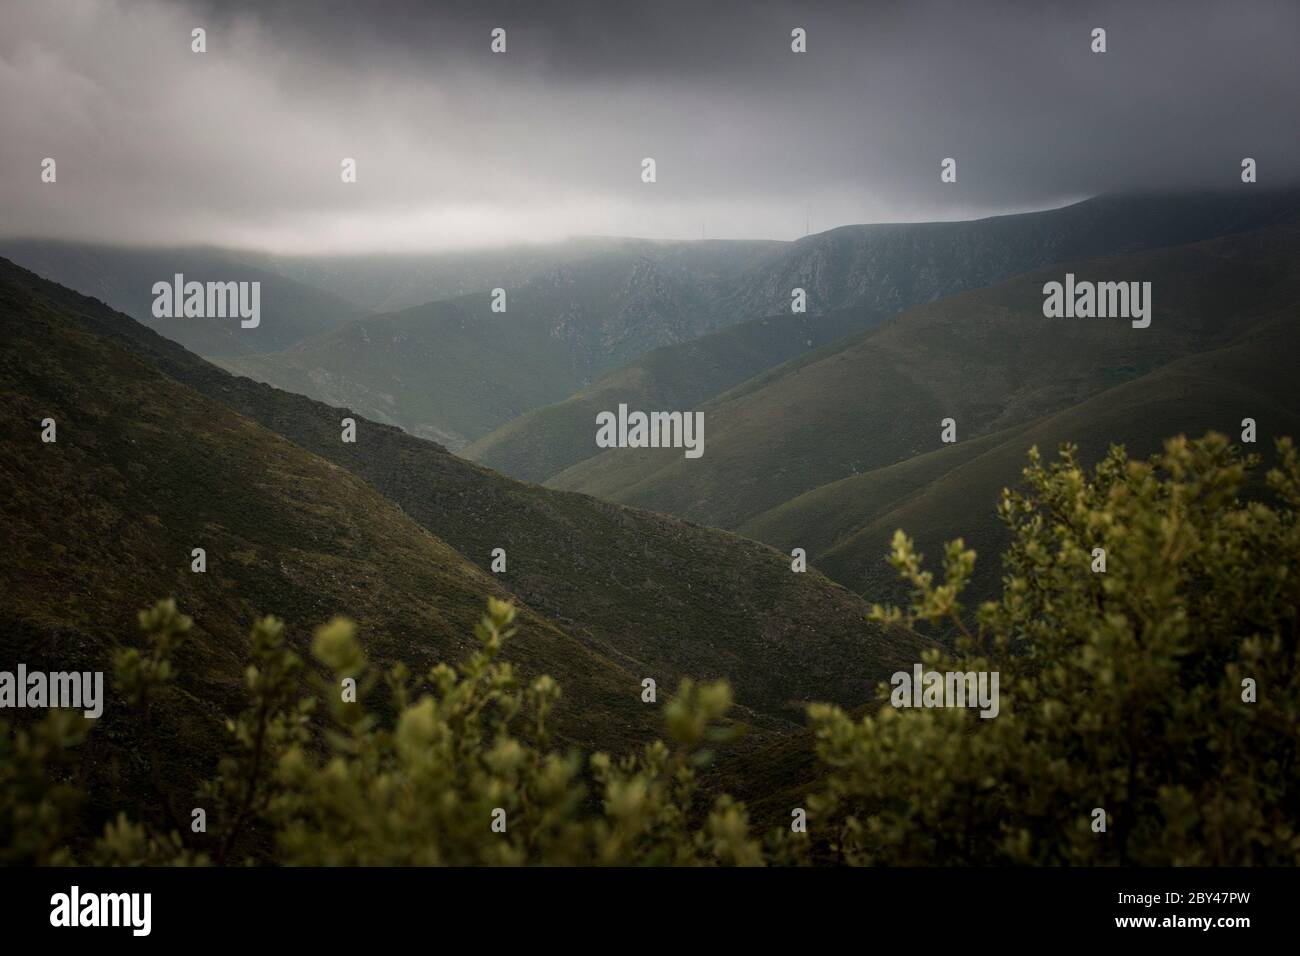 View through the bush vegetation of mountains and valleys landscape in a grey and cloudy weather. Mountain landscape view. Stock Photo